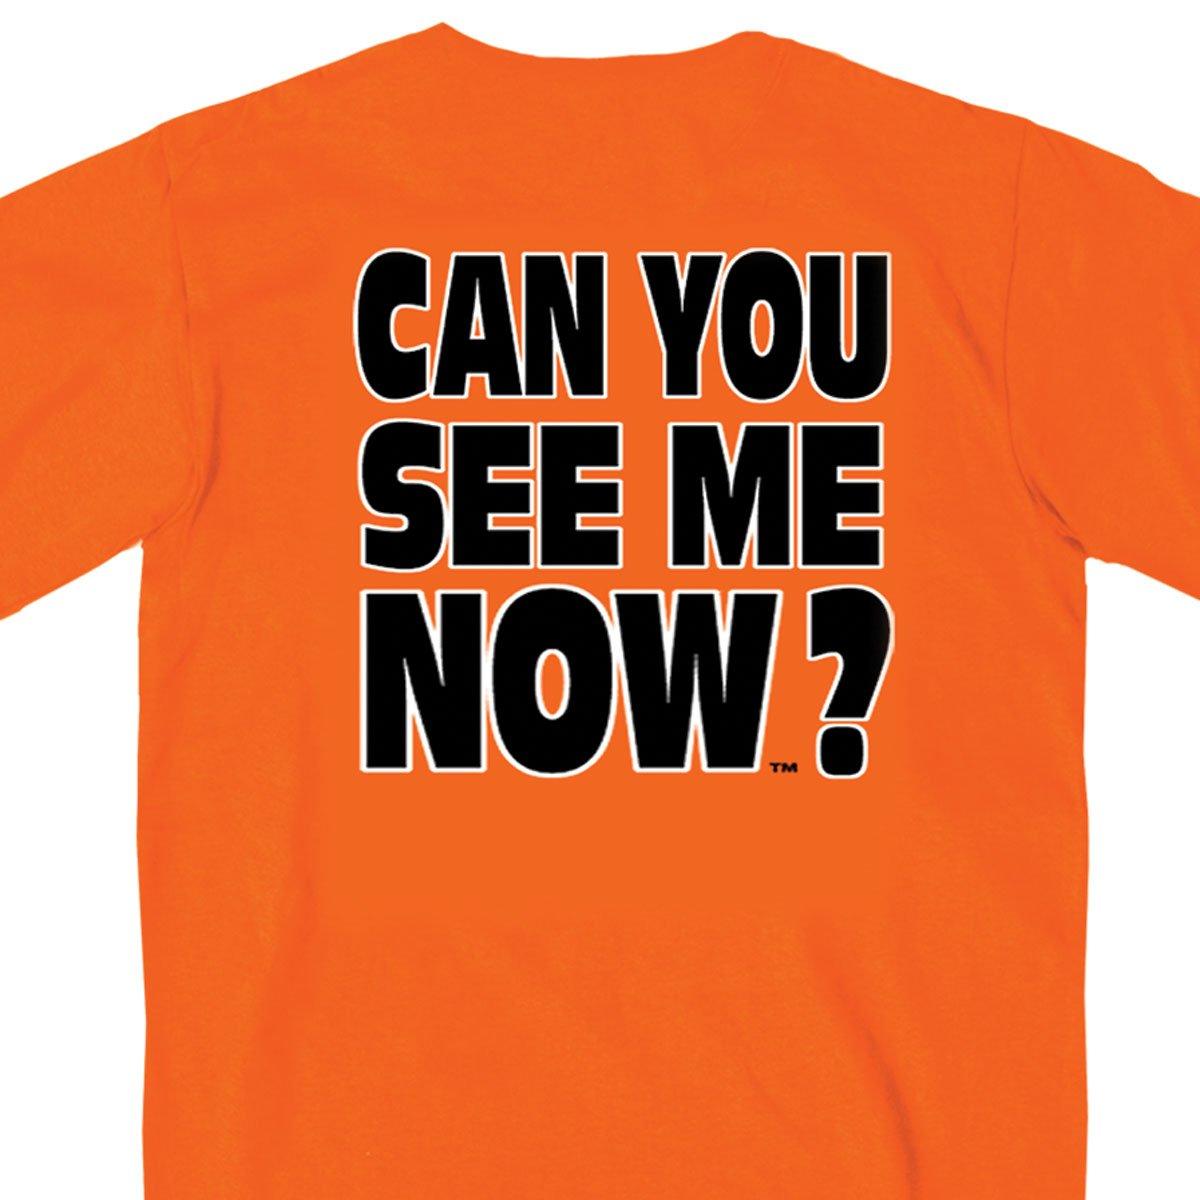 Hot Leathers Men's Can You See Me Now T-Shirt, Safety Orange - American Legend Rider